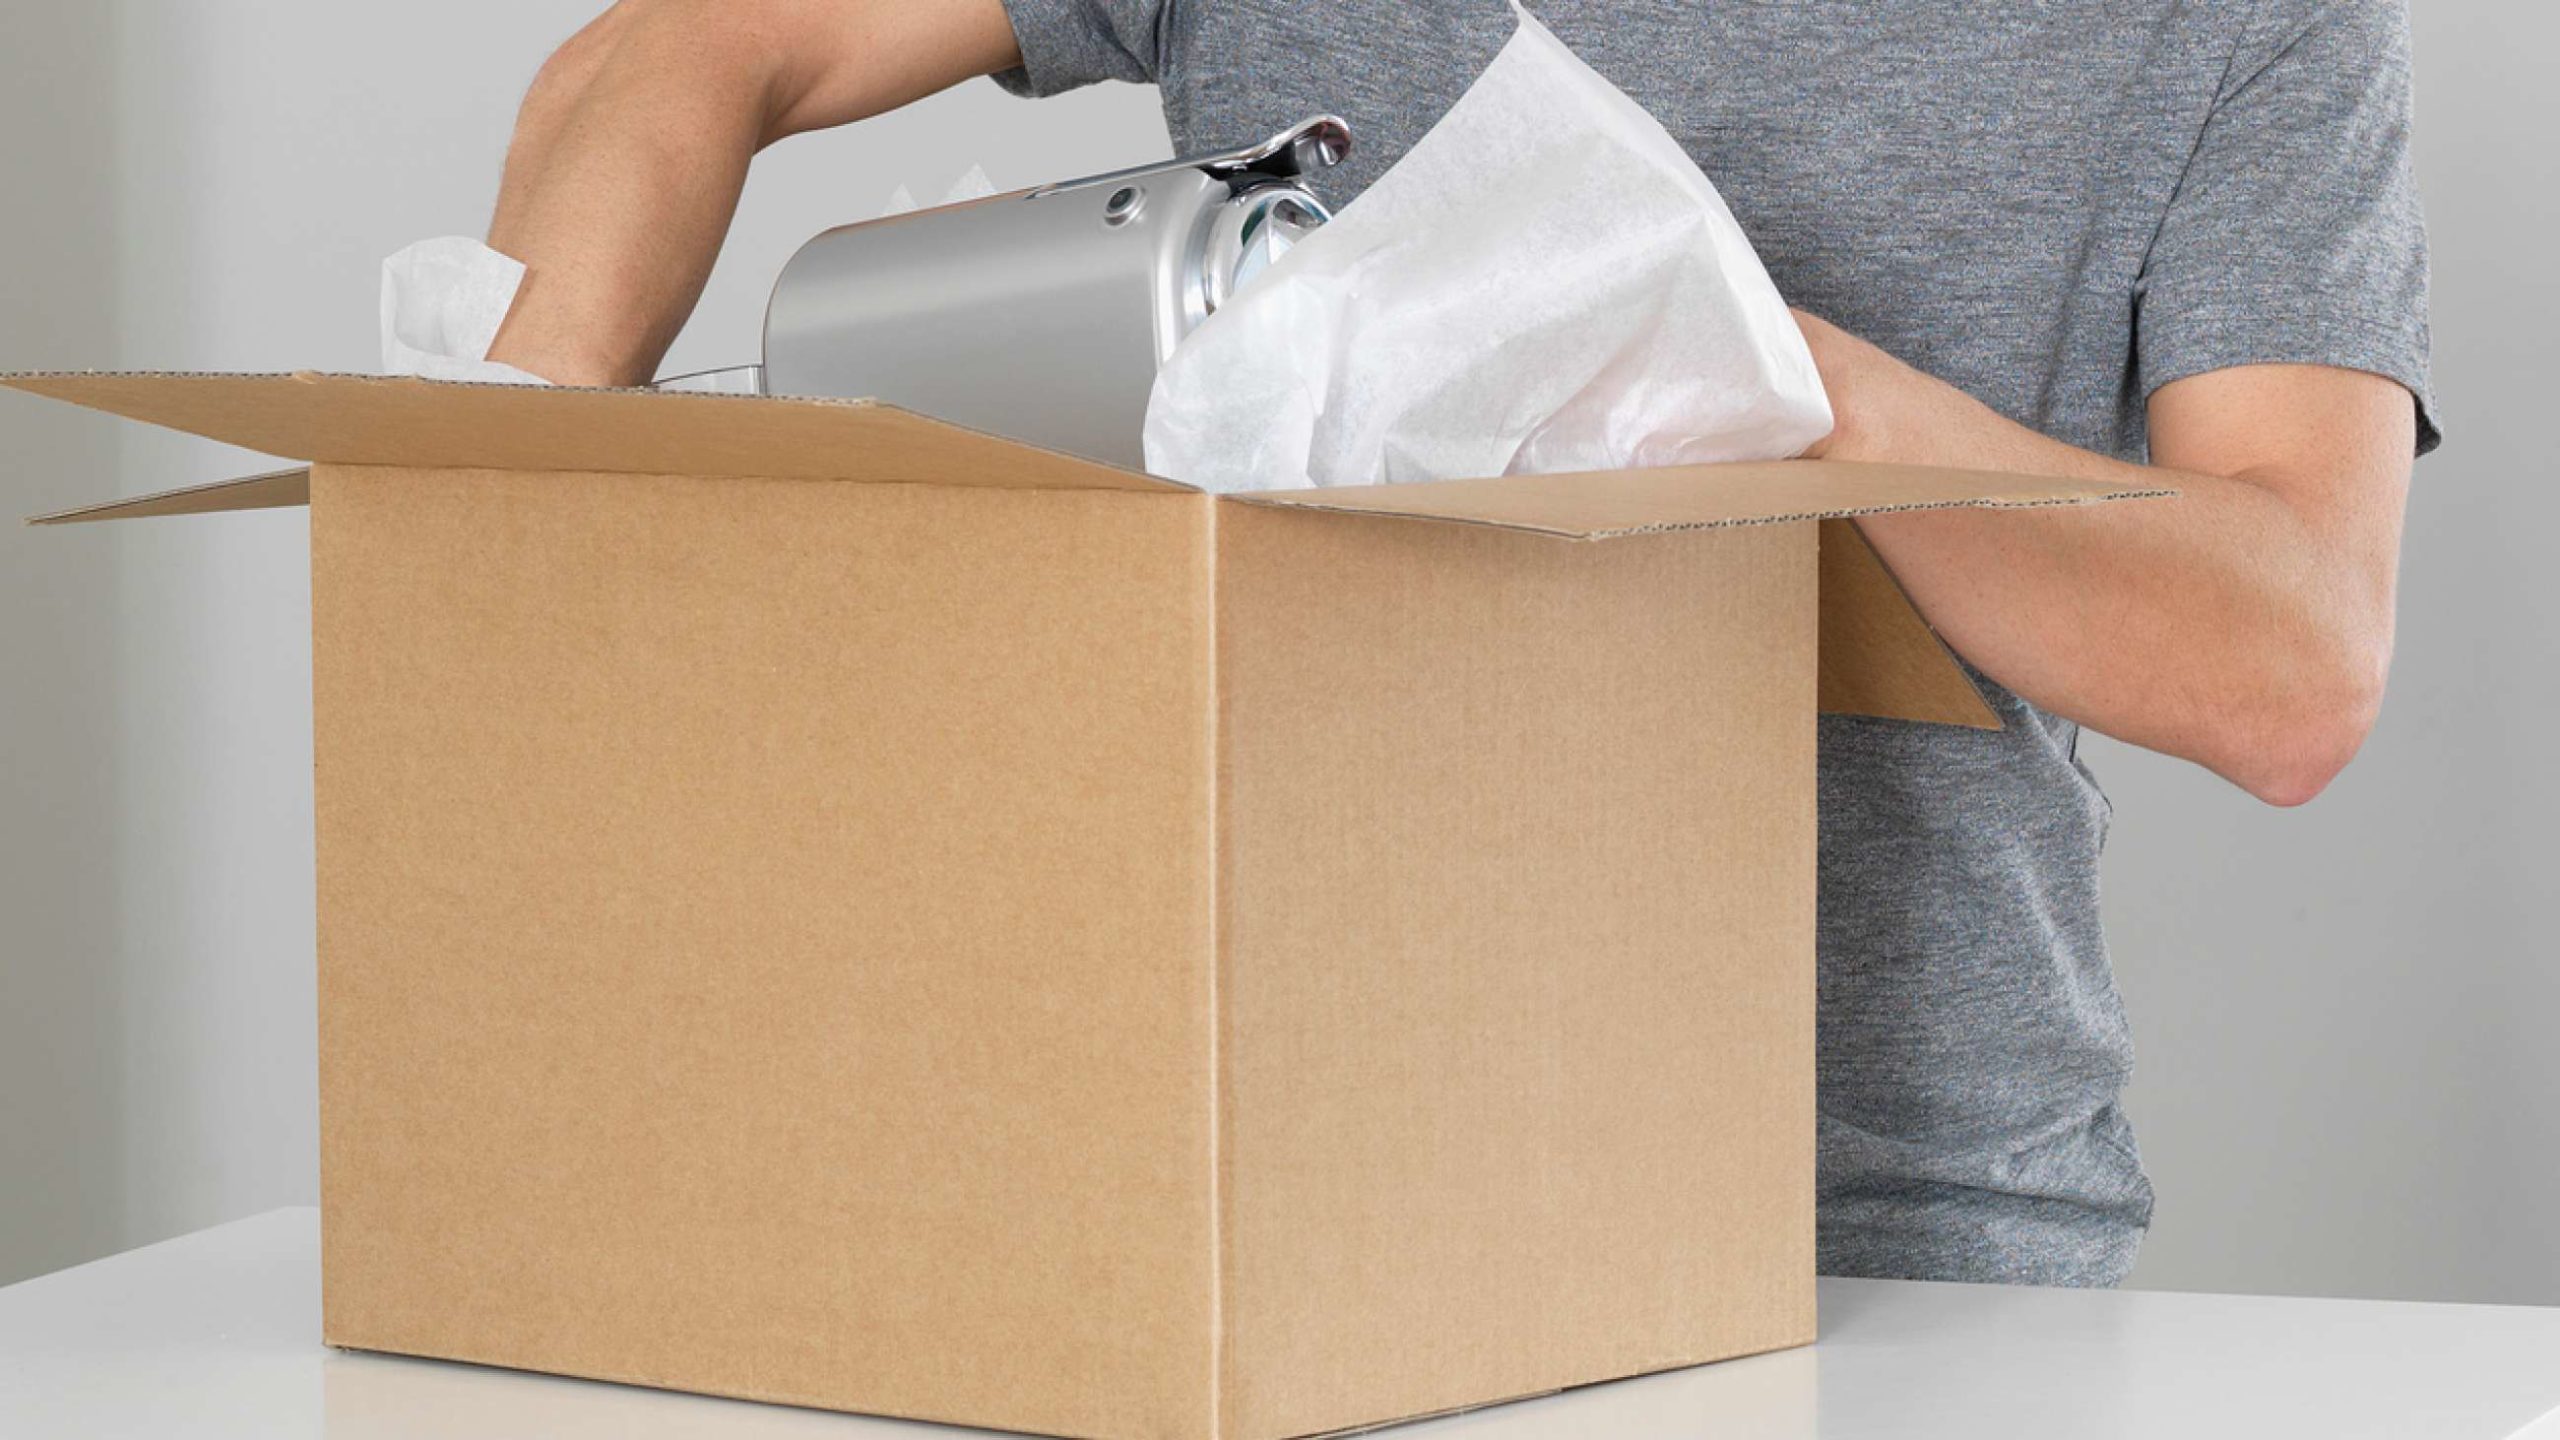 How to Make Sure Your Packages are Perfect Every Time